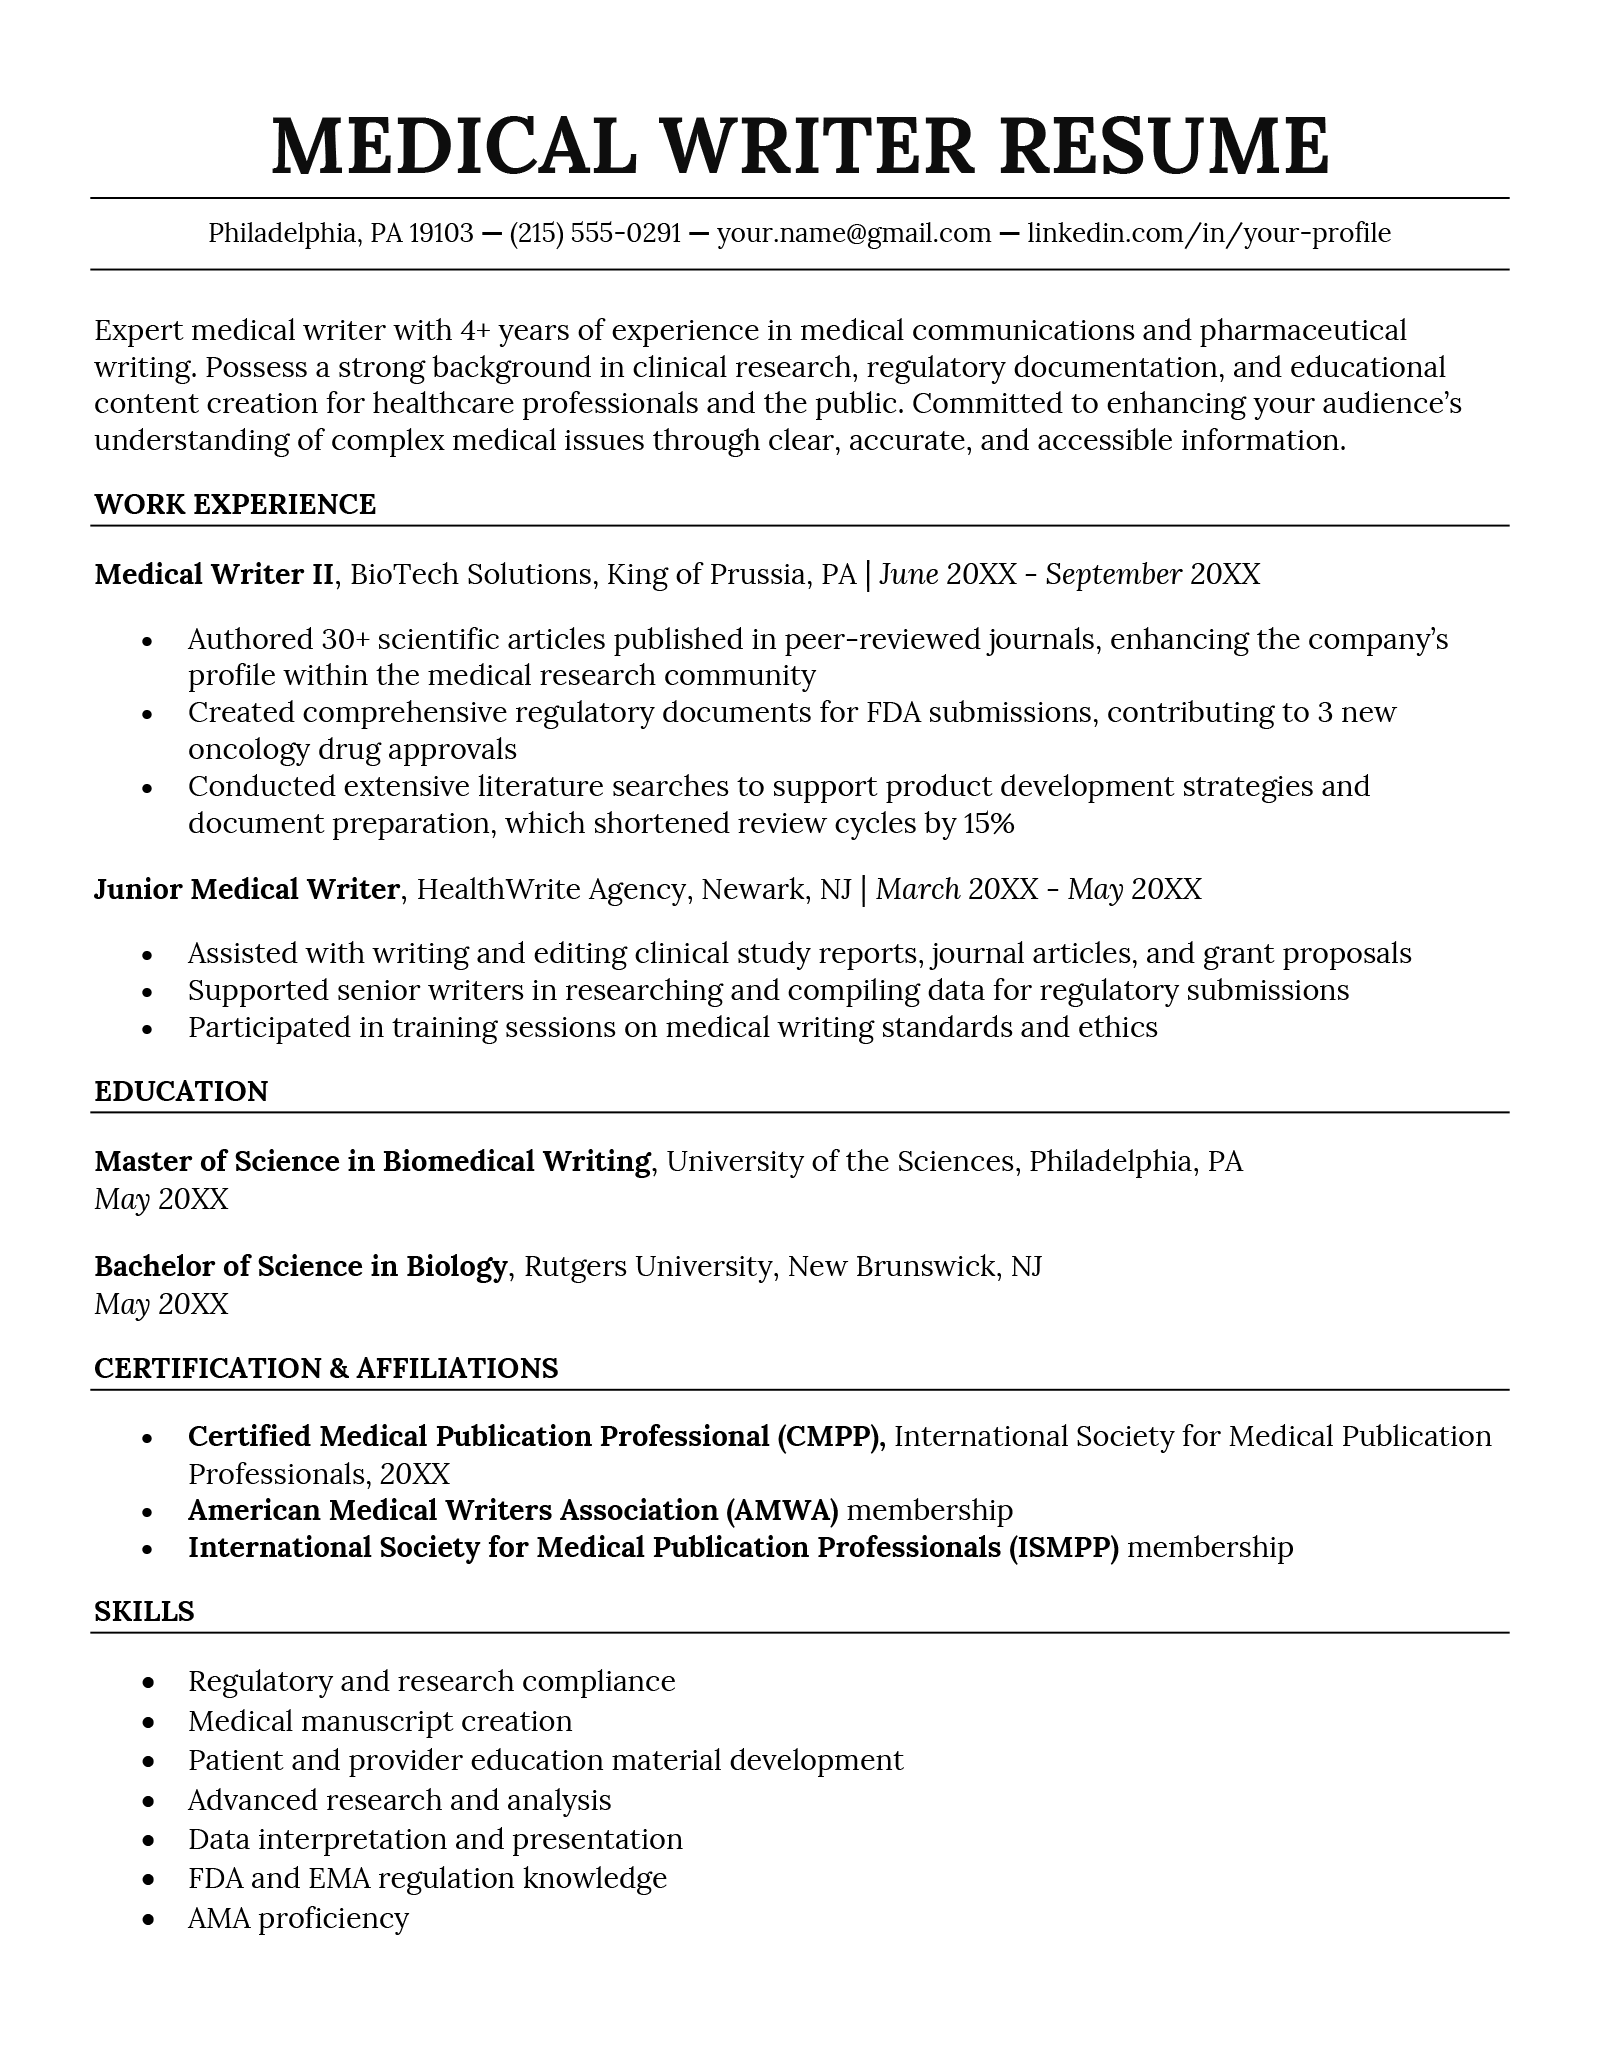 A medical writer resume example.